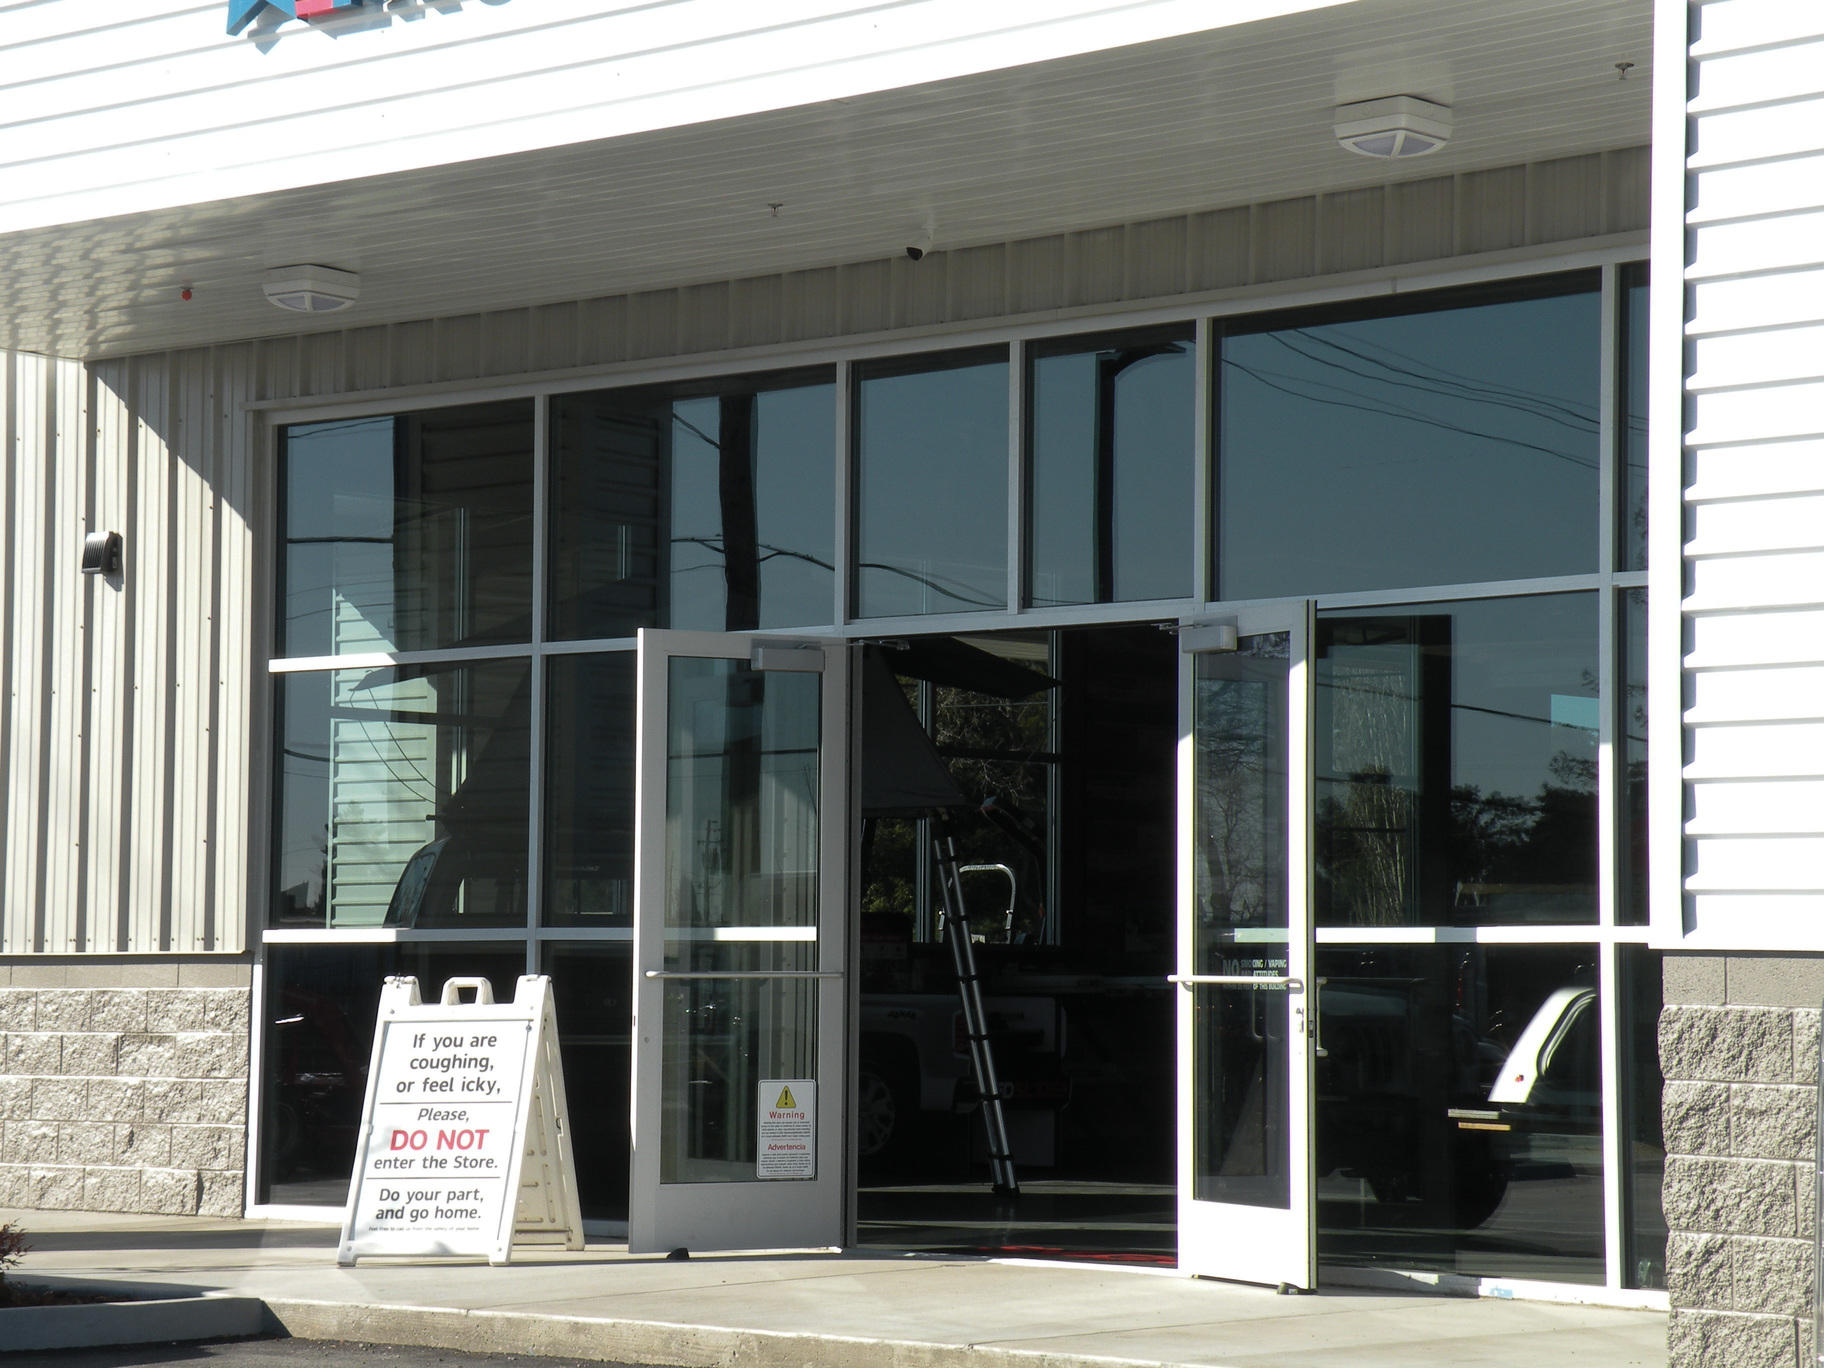 Insulated glass storefront